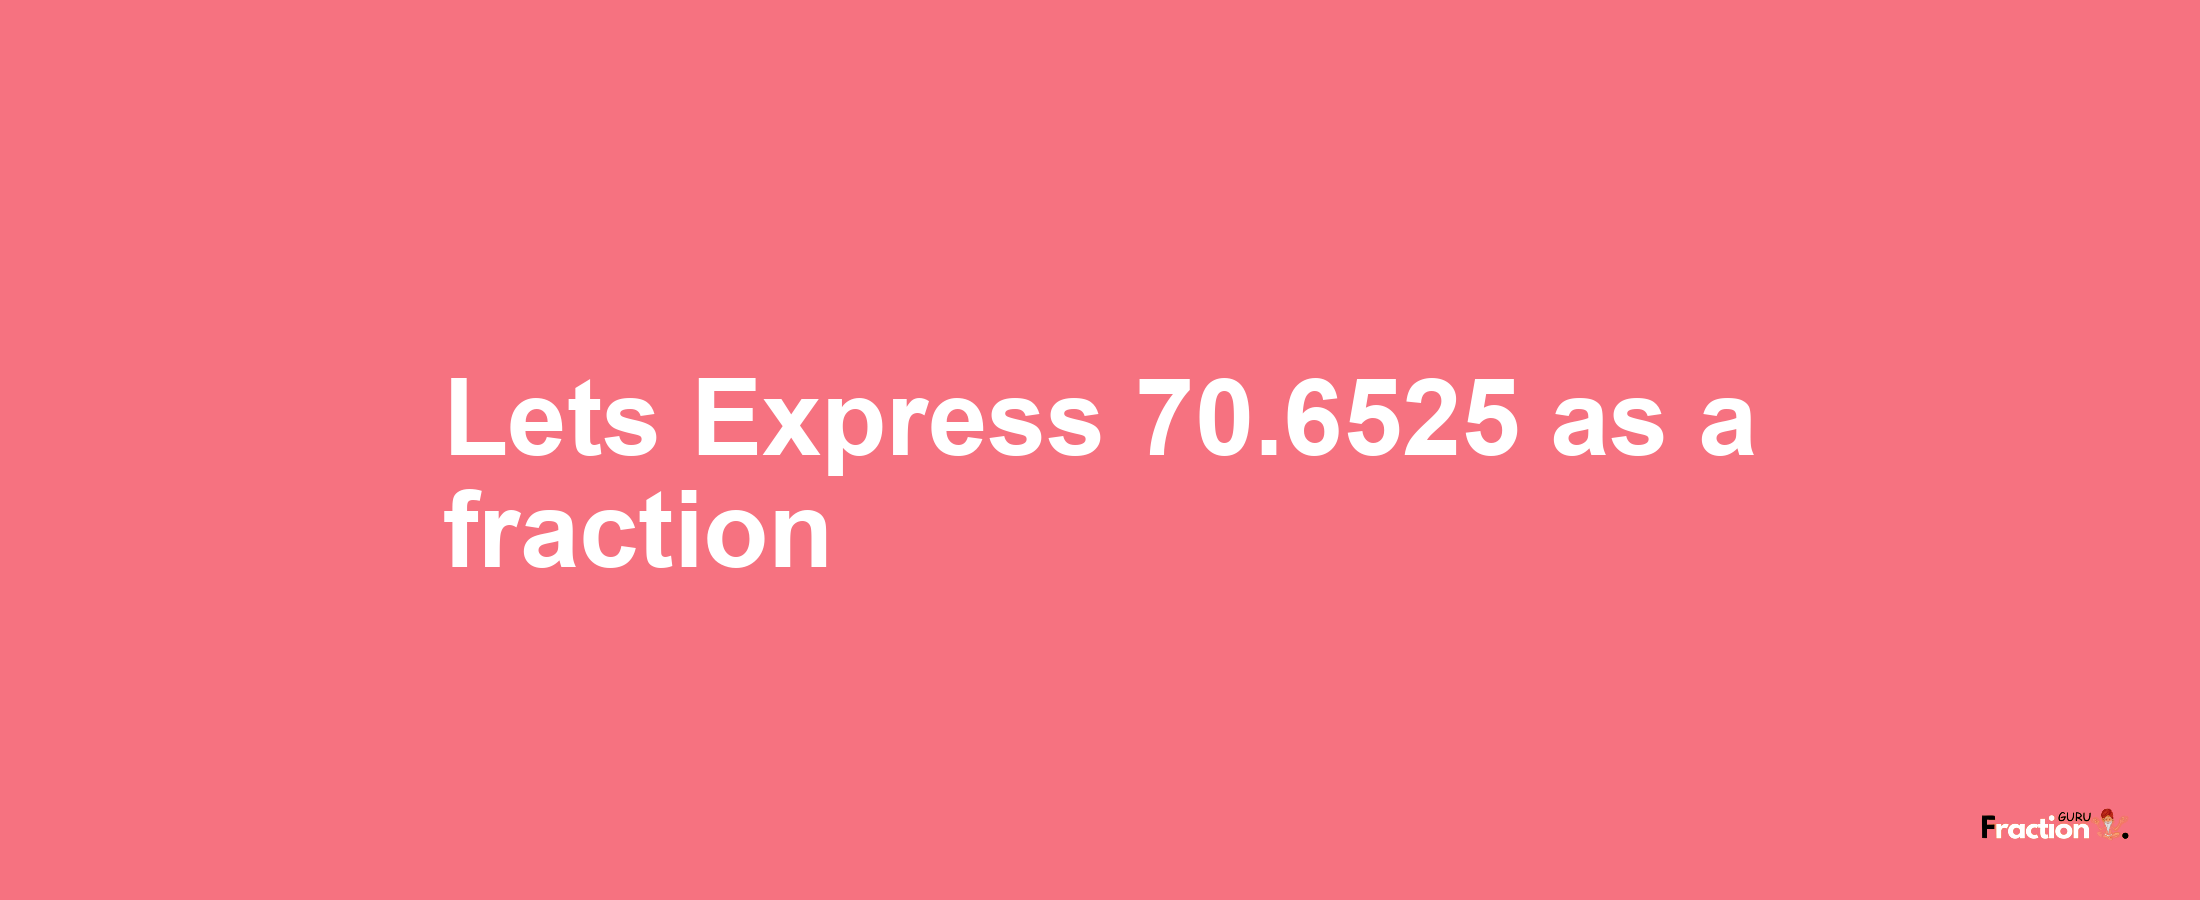 Lets Express 70.6525 as afraction